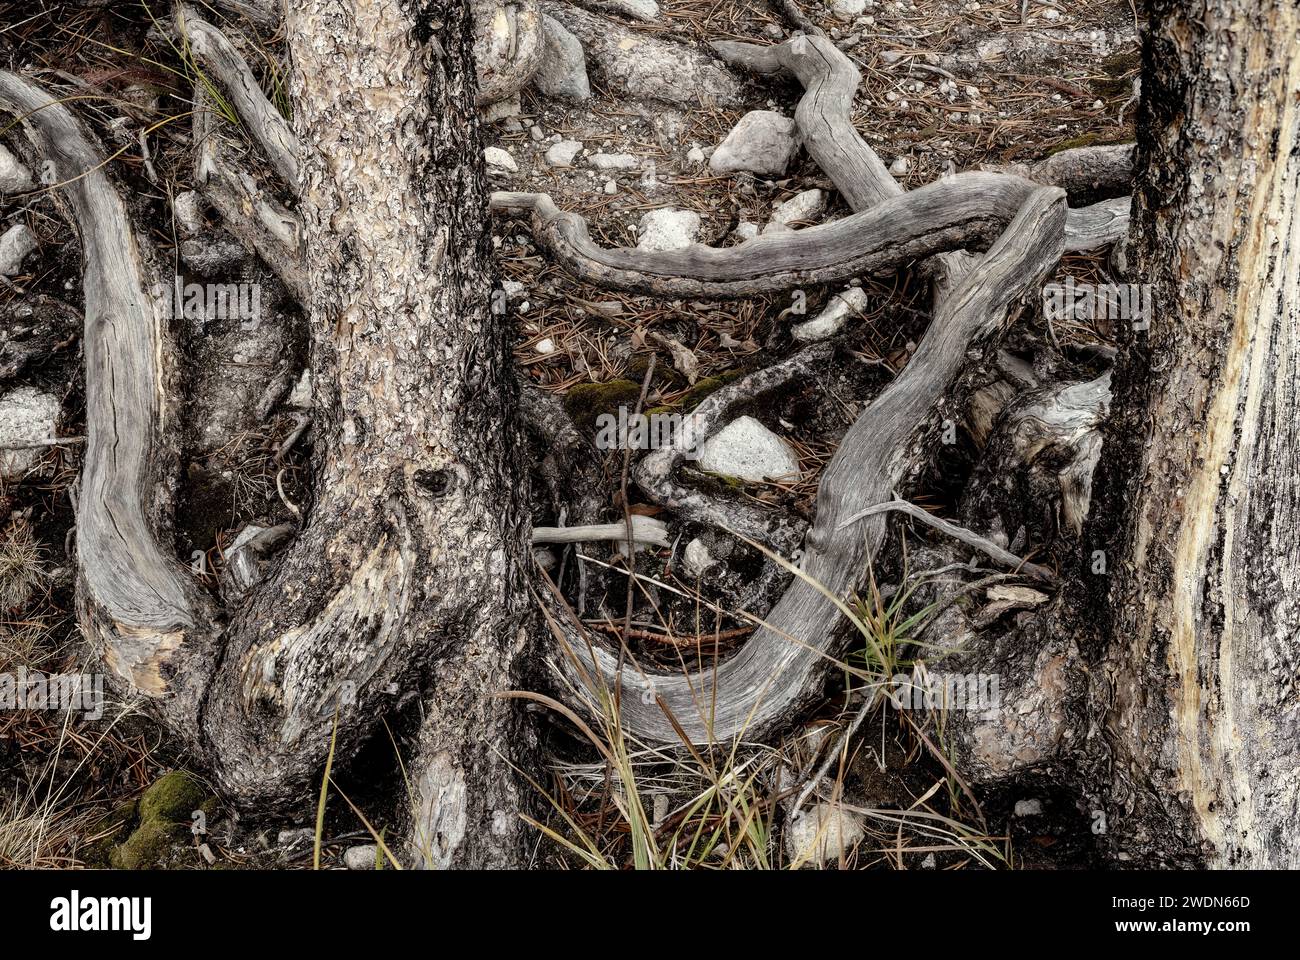 Forest floor details showing tangled roots Stock Photo